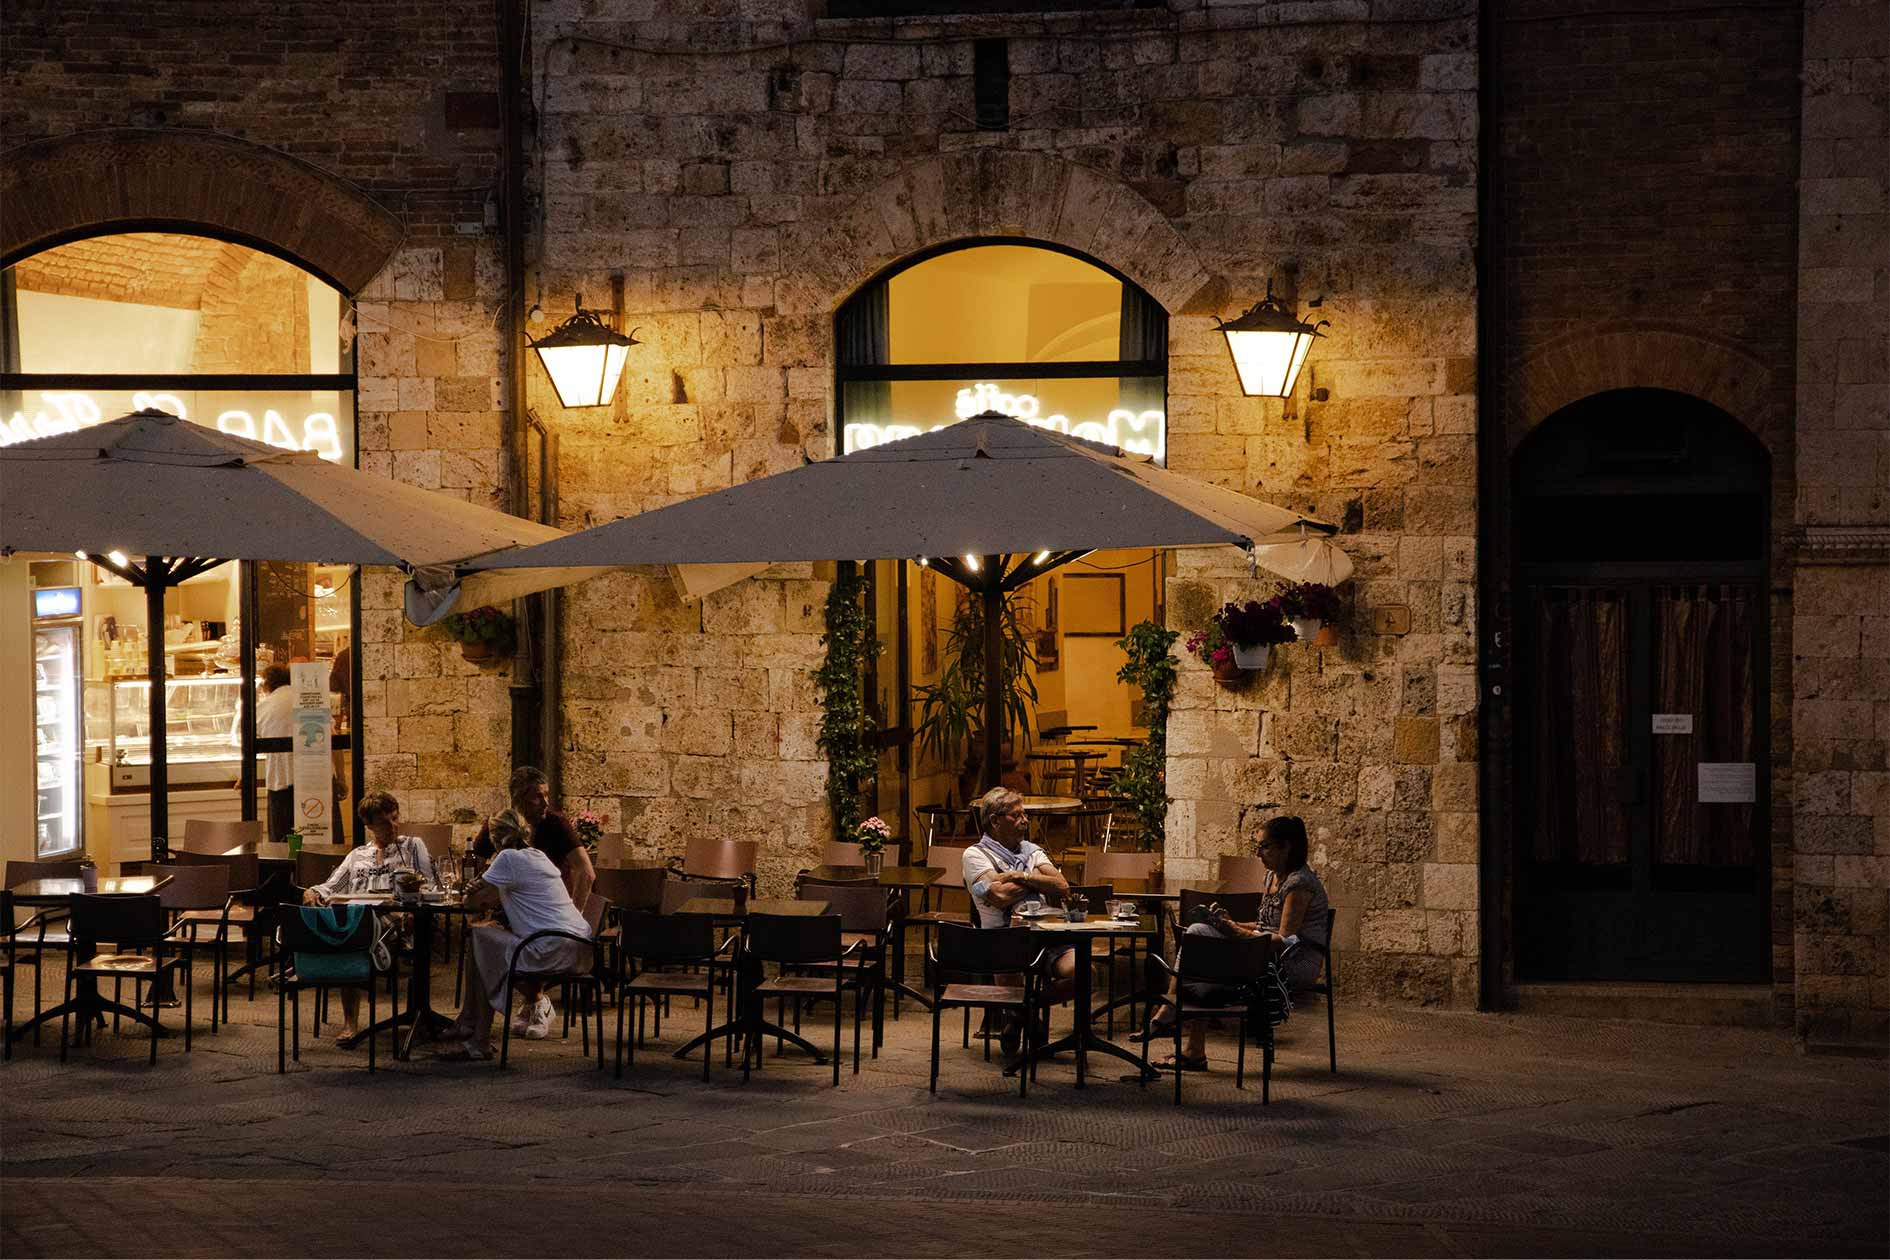 San Gimignano in the evening